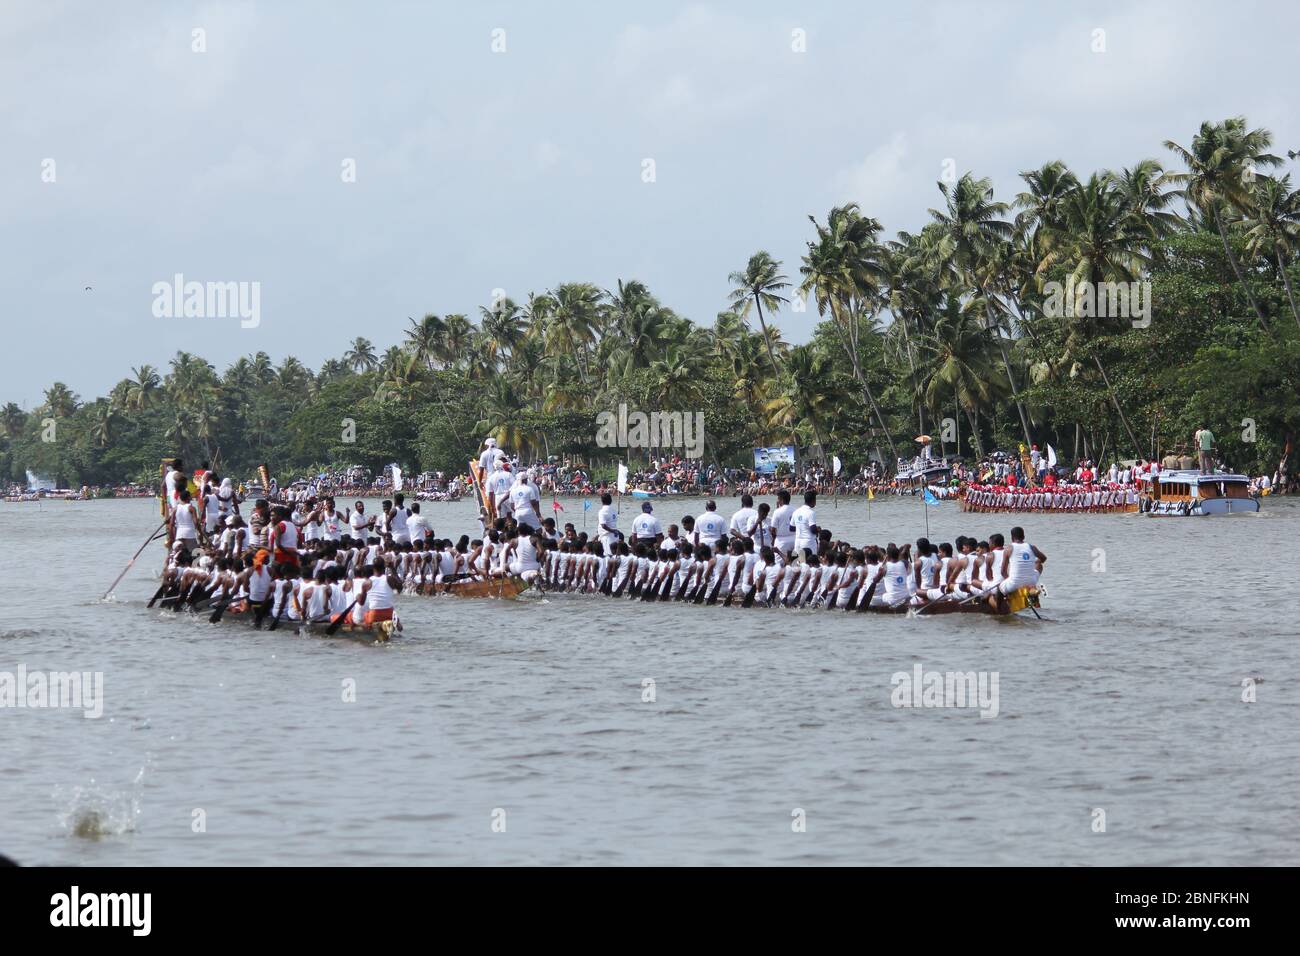 Oarsmen during the annual Nehru Trophy Boat Race in Alleppey, Kerala Stock Photo